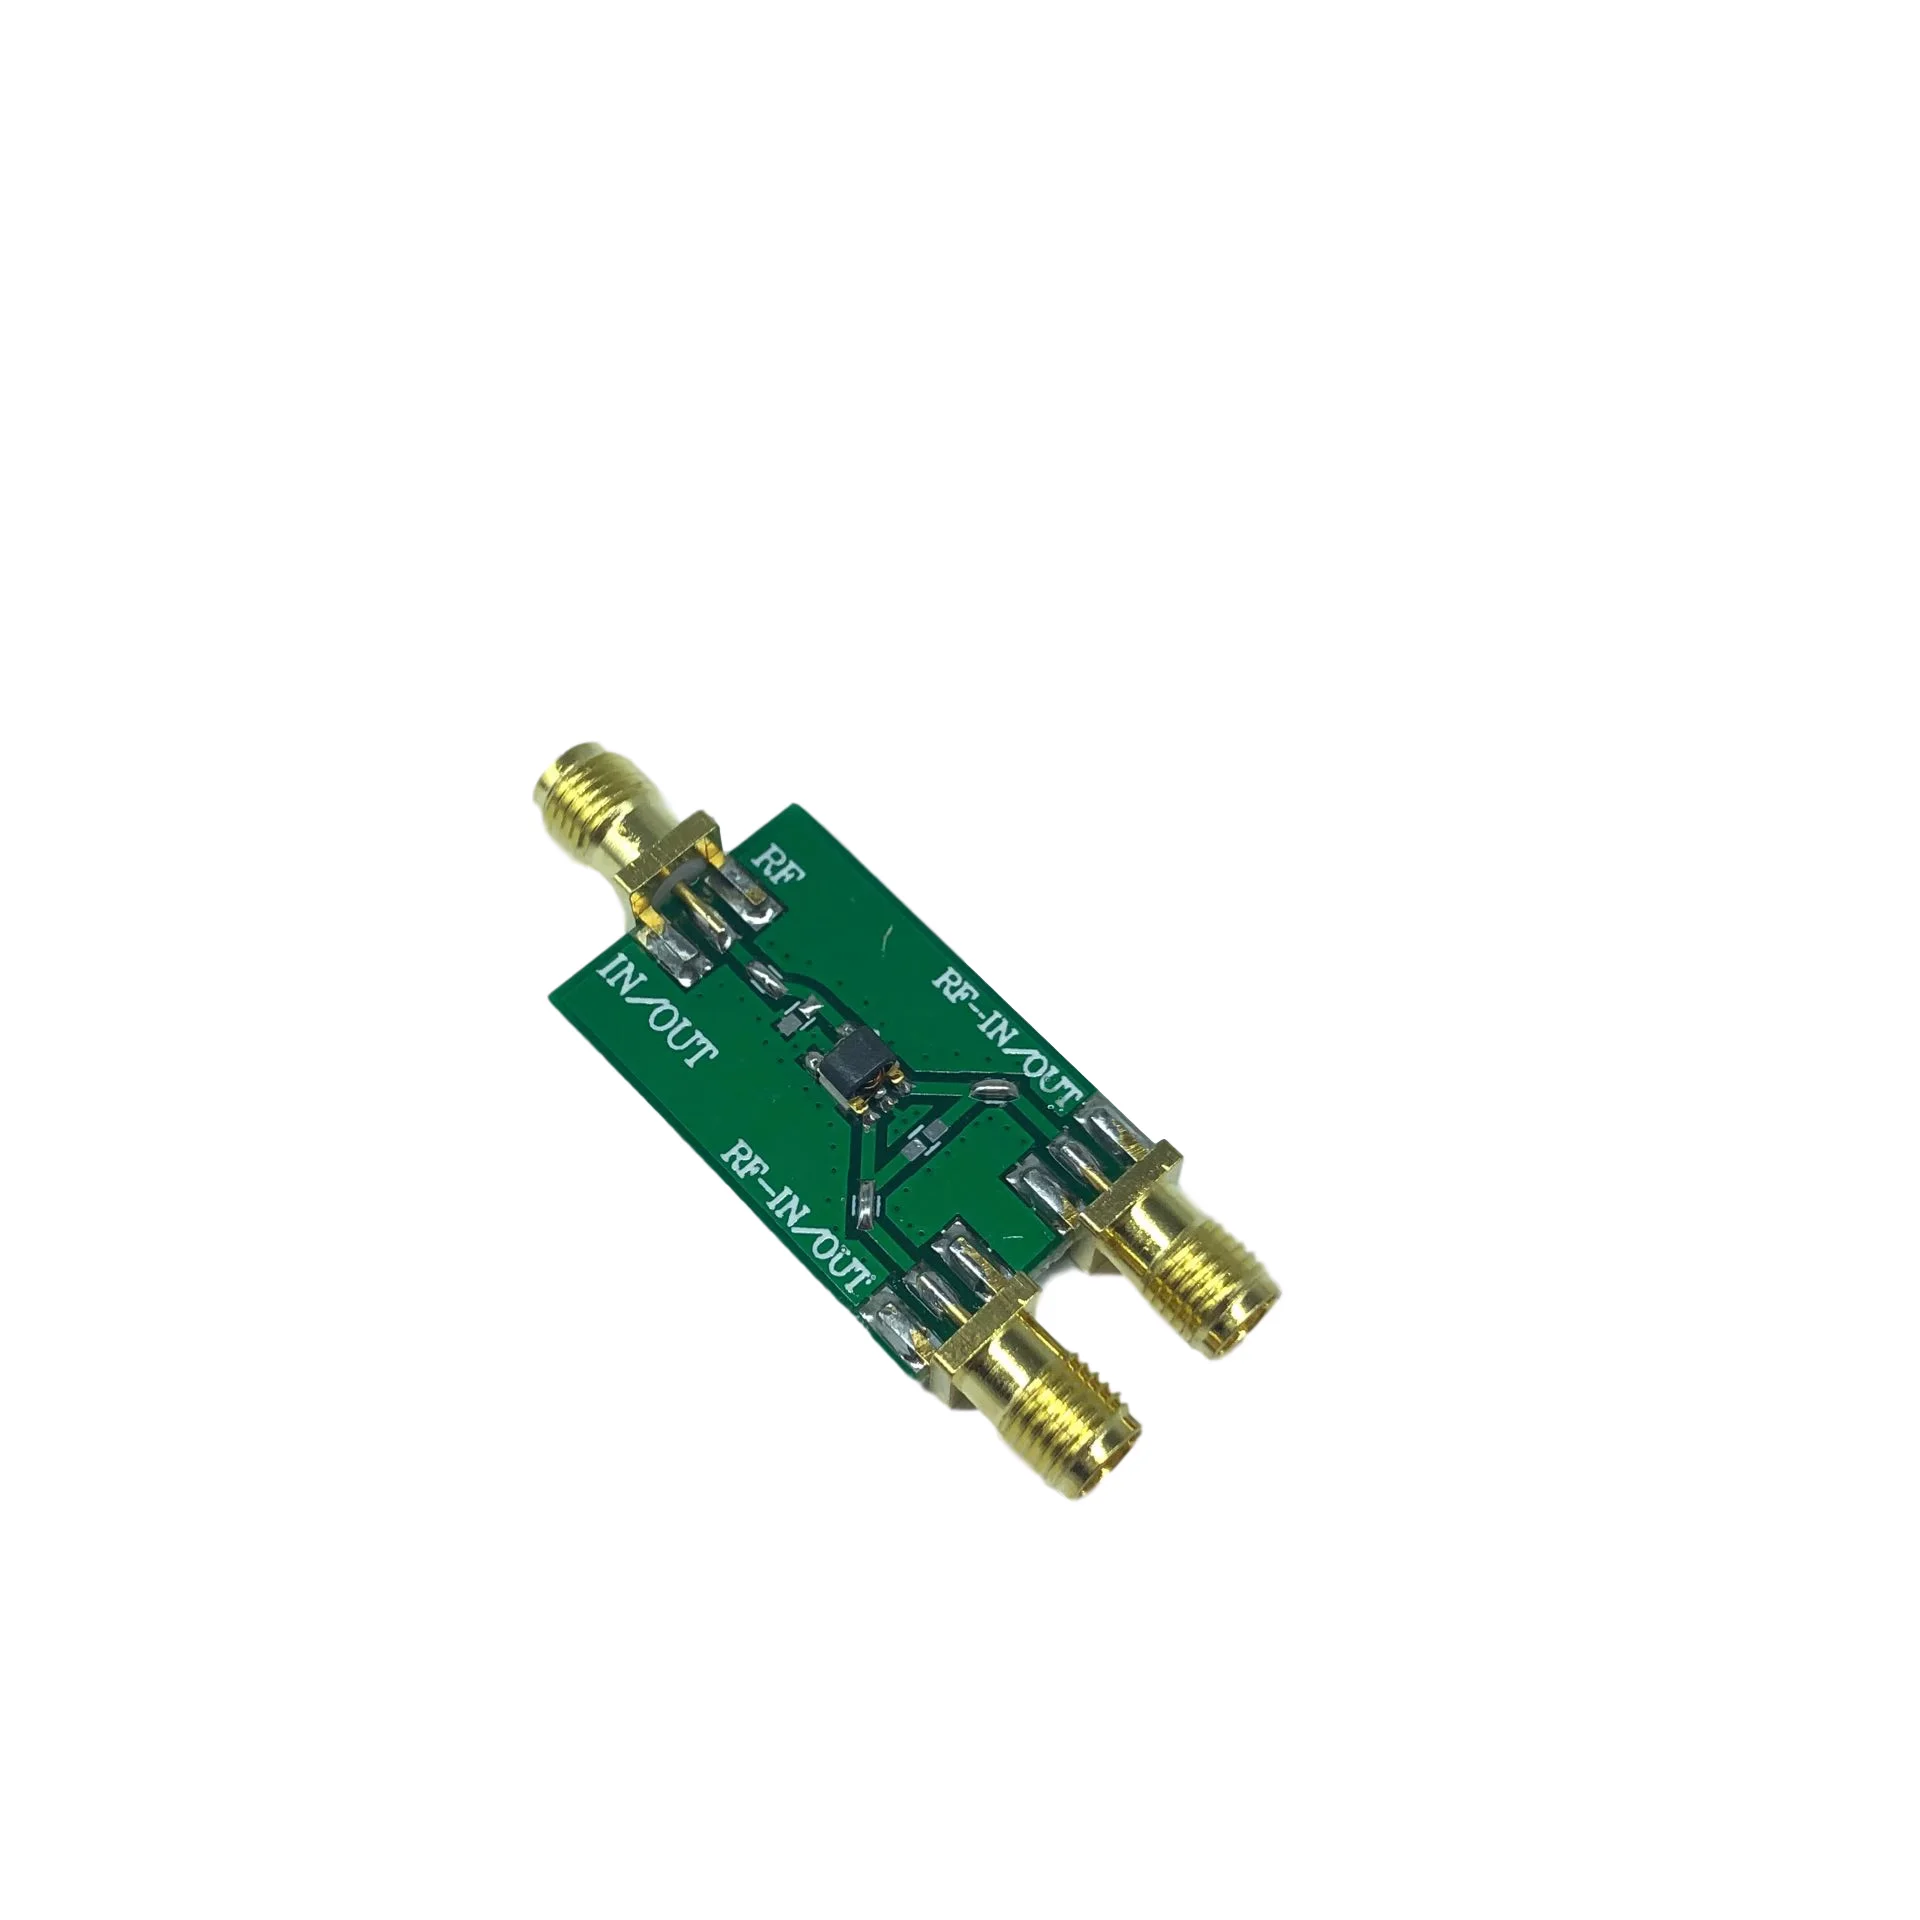 

ADF4350 ADF4355 Differential Single Port Conversion Device Balun 1:1 100KHZ-6GHZ